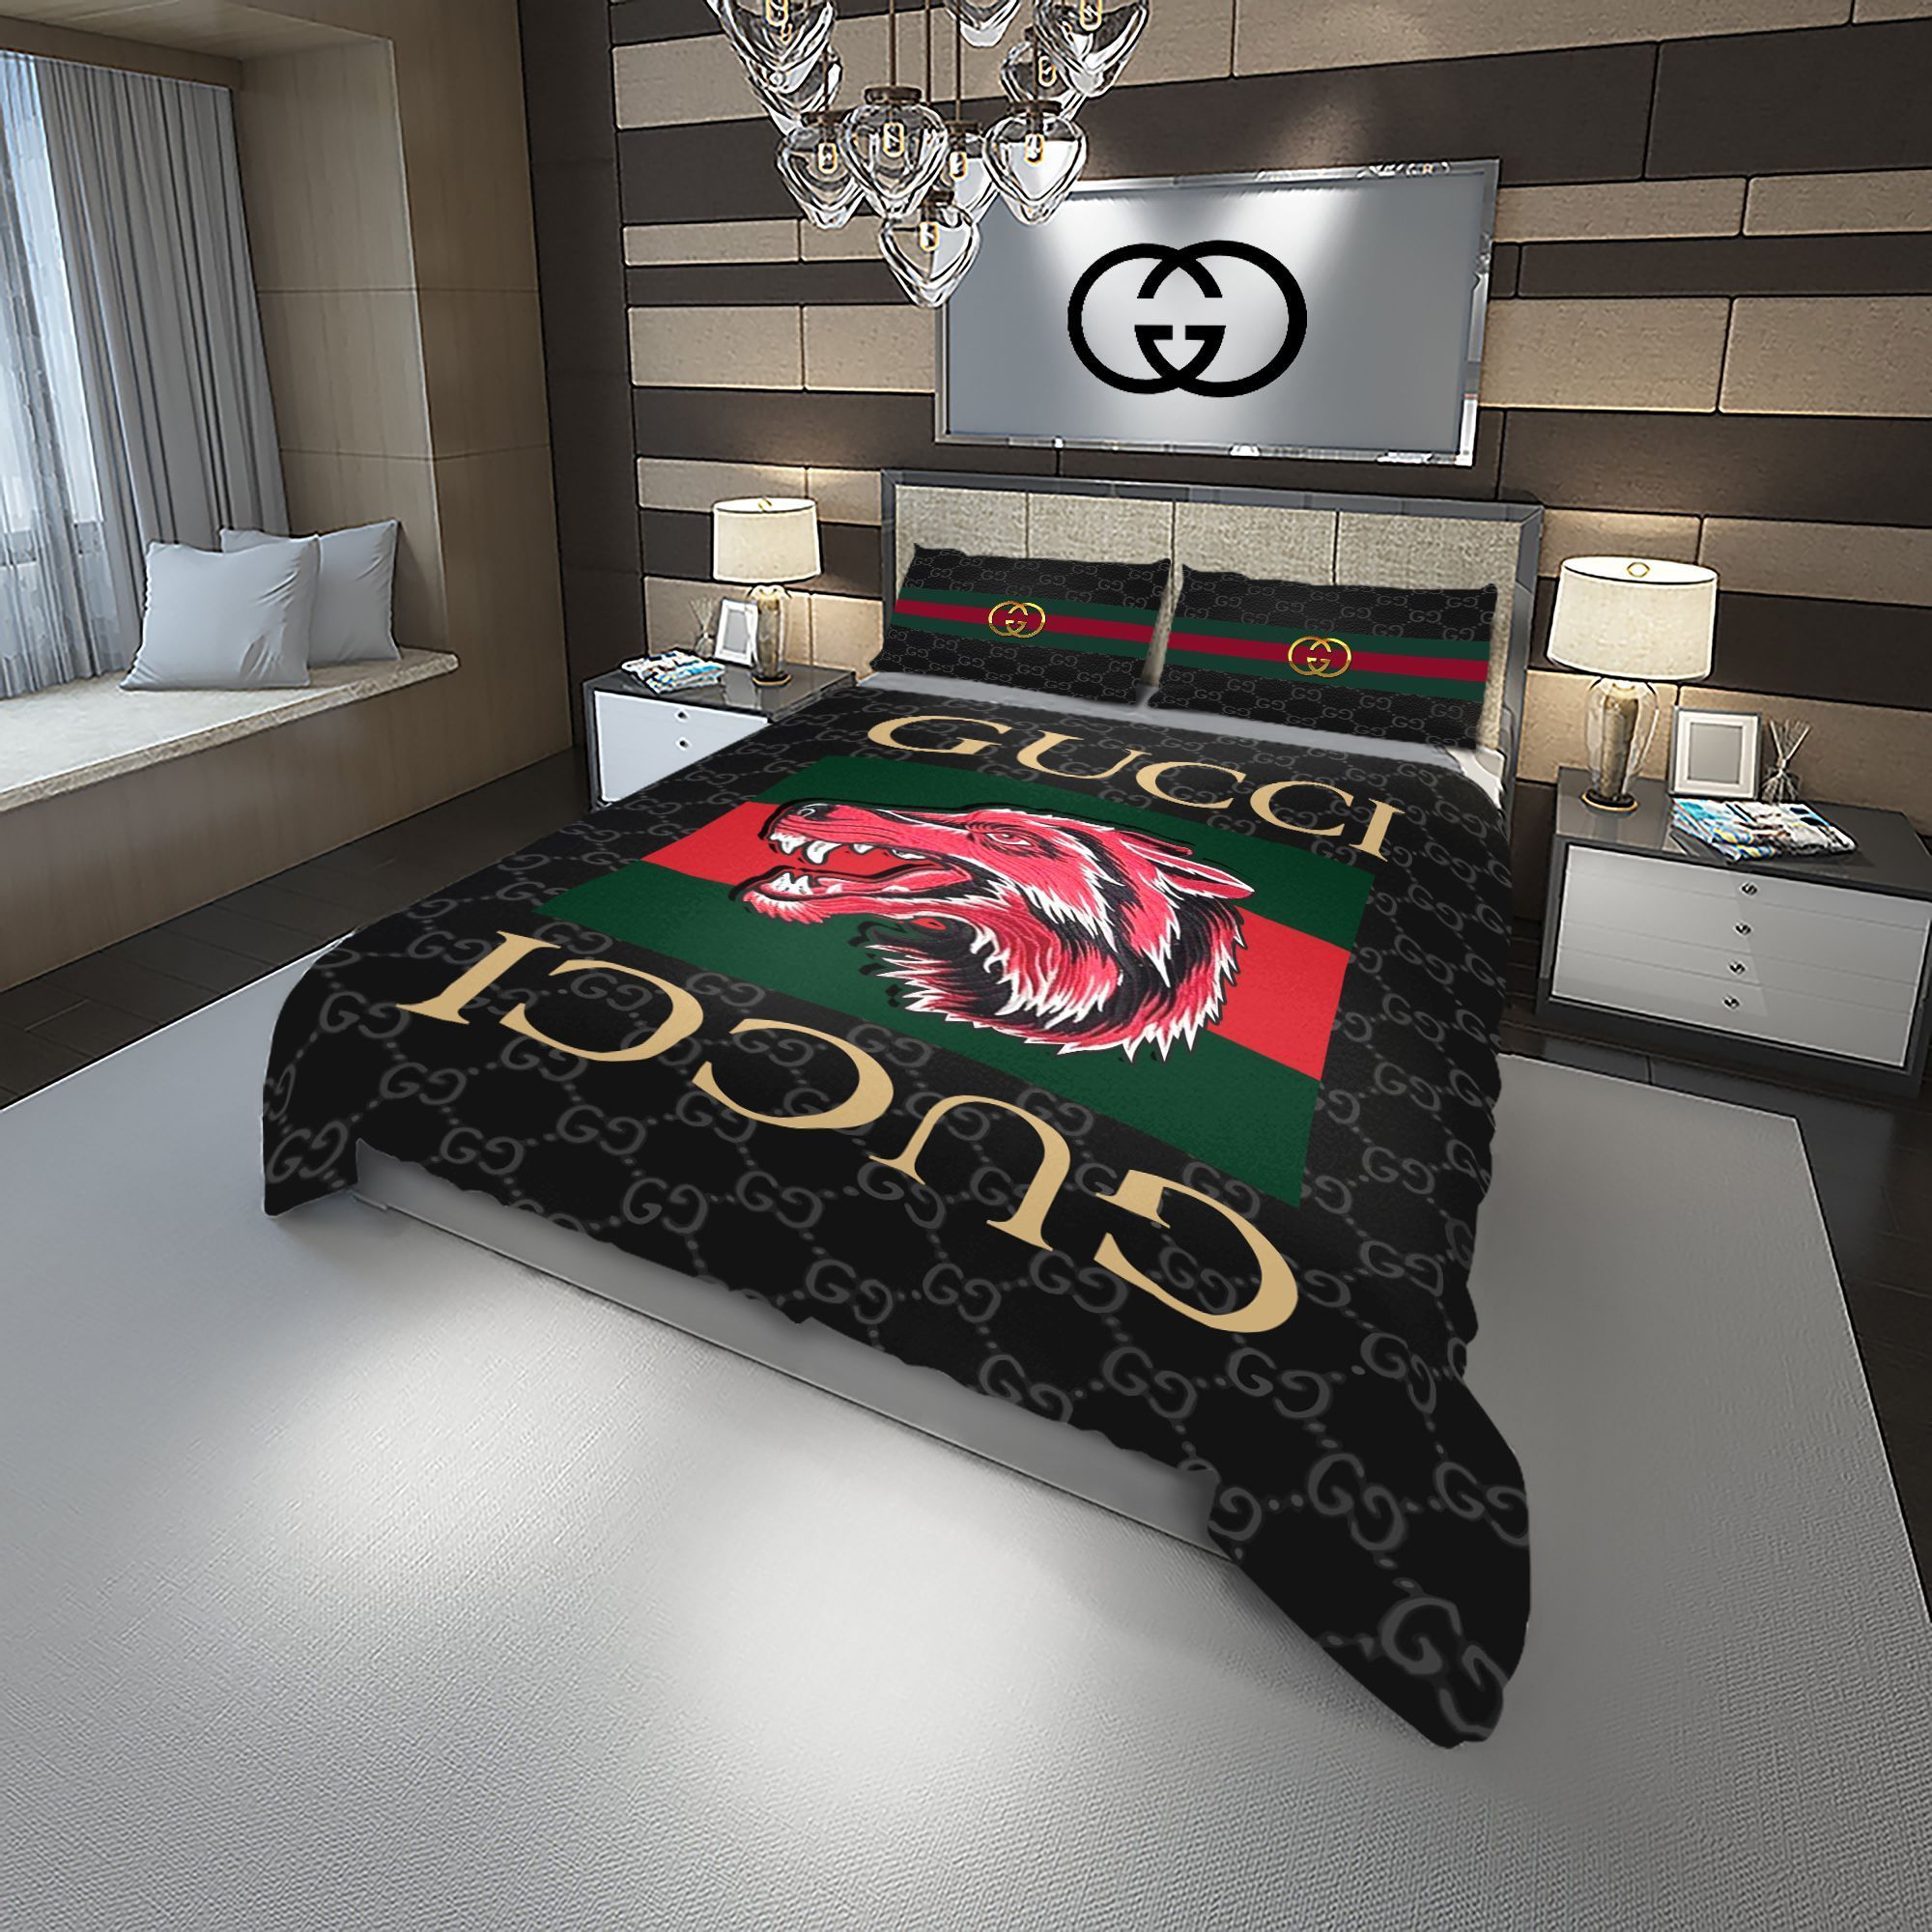 Let me show you about some luxury brand bedding set 2022 6